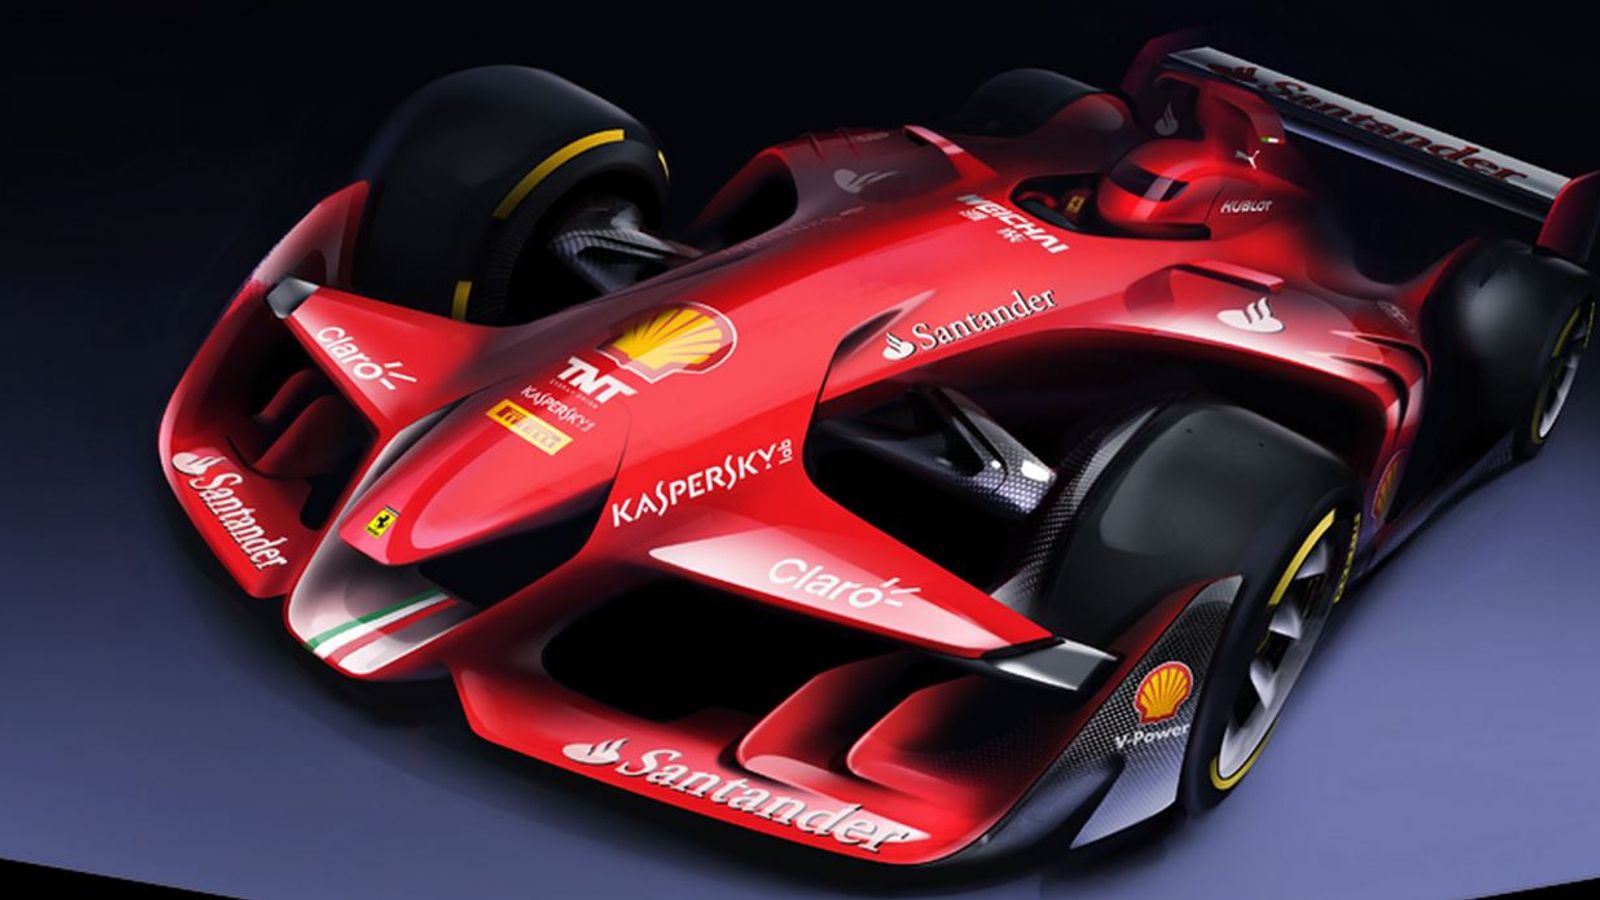 F1's future: Video game-style car designs from 2021, says ...